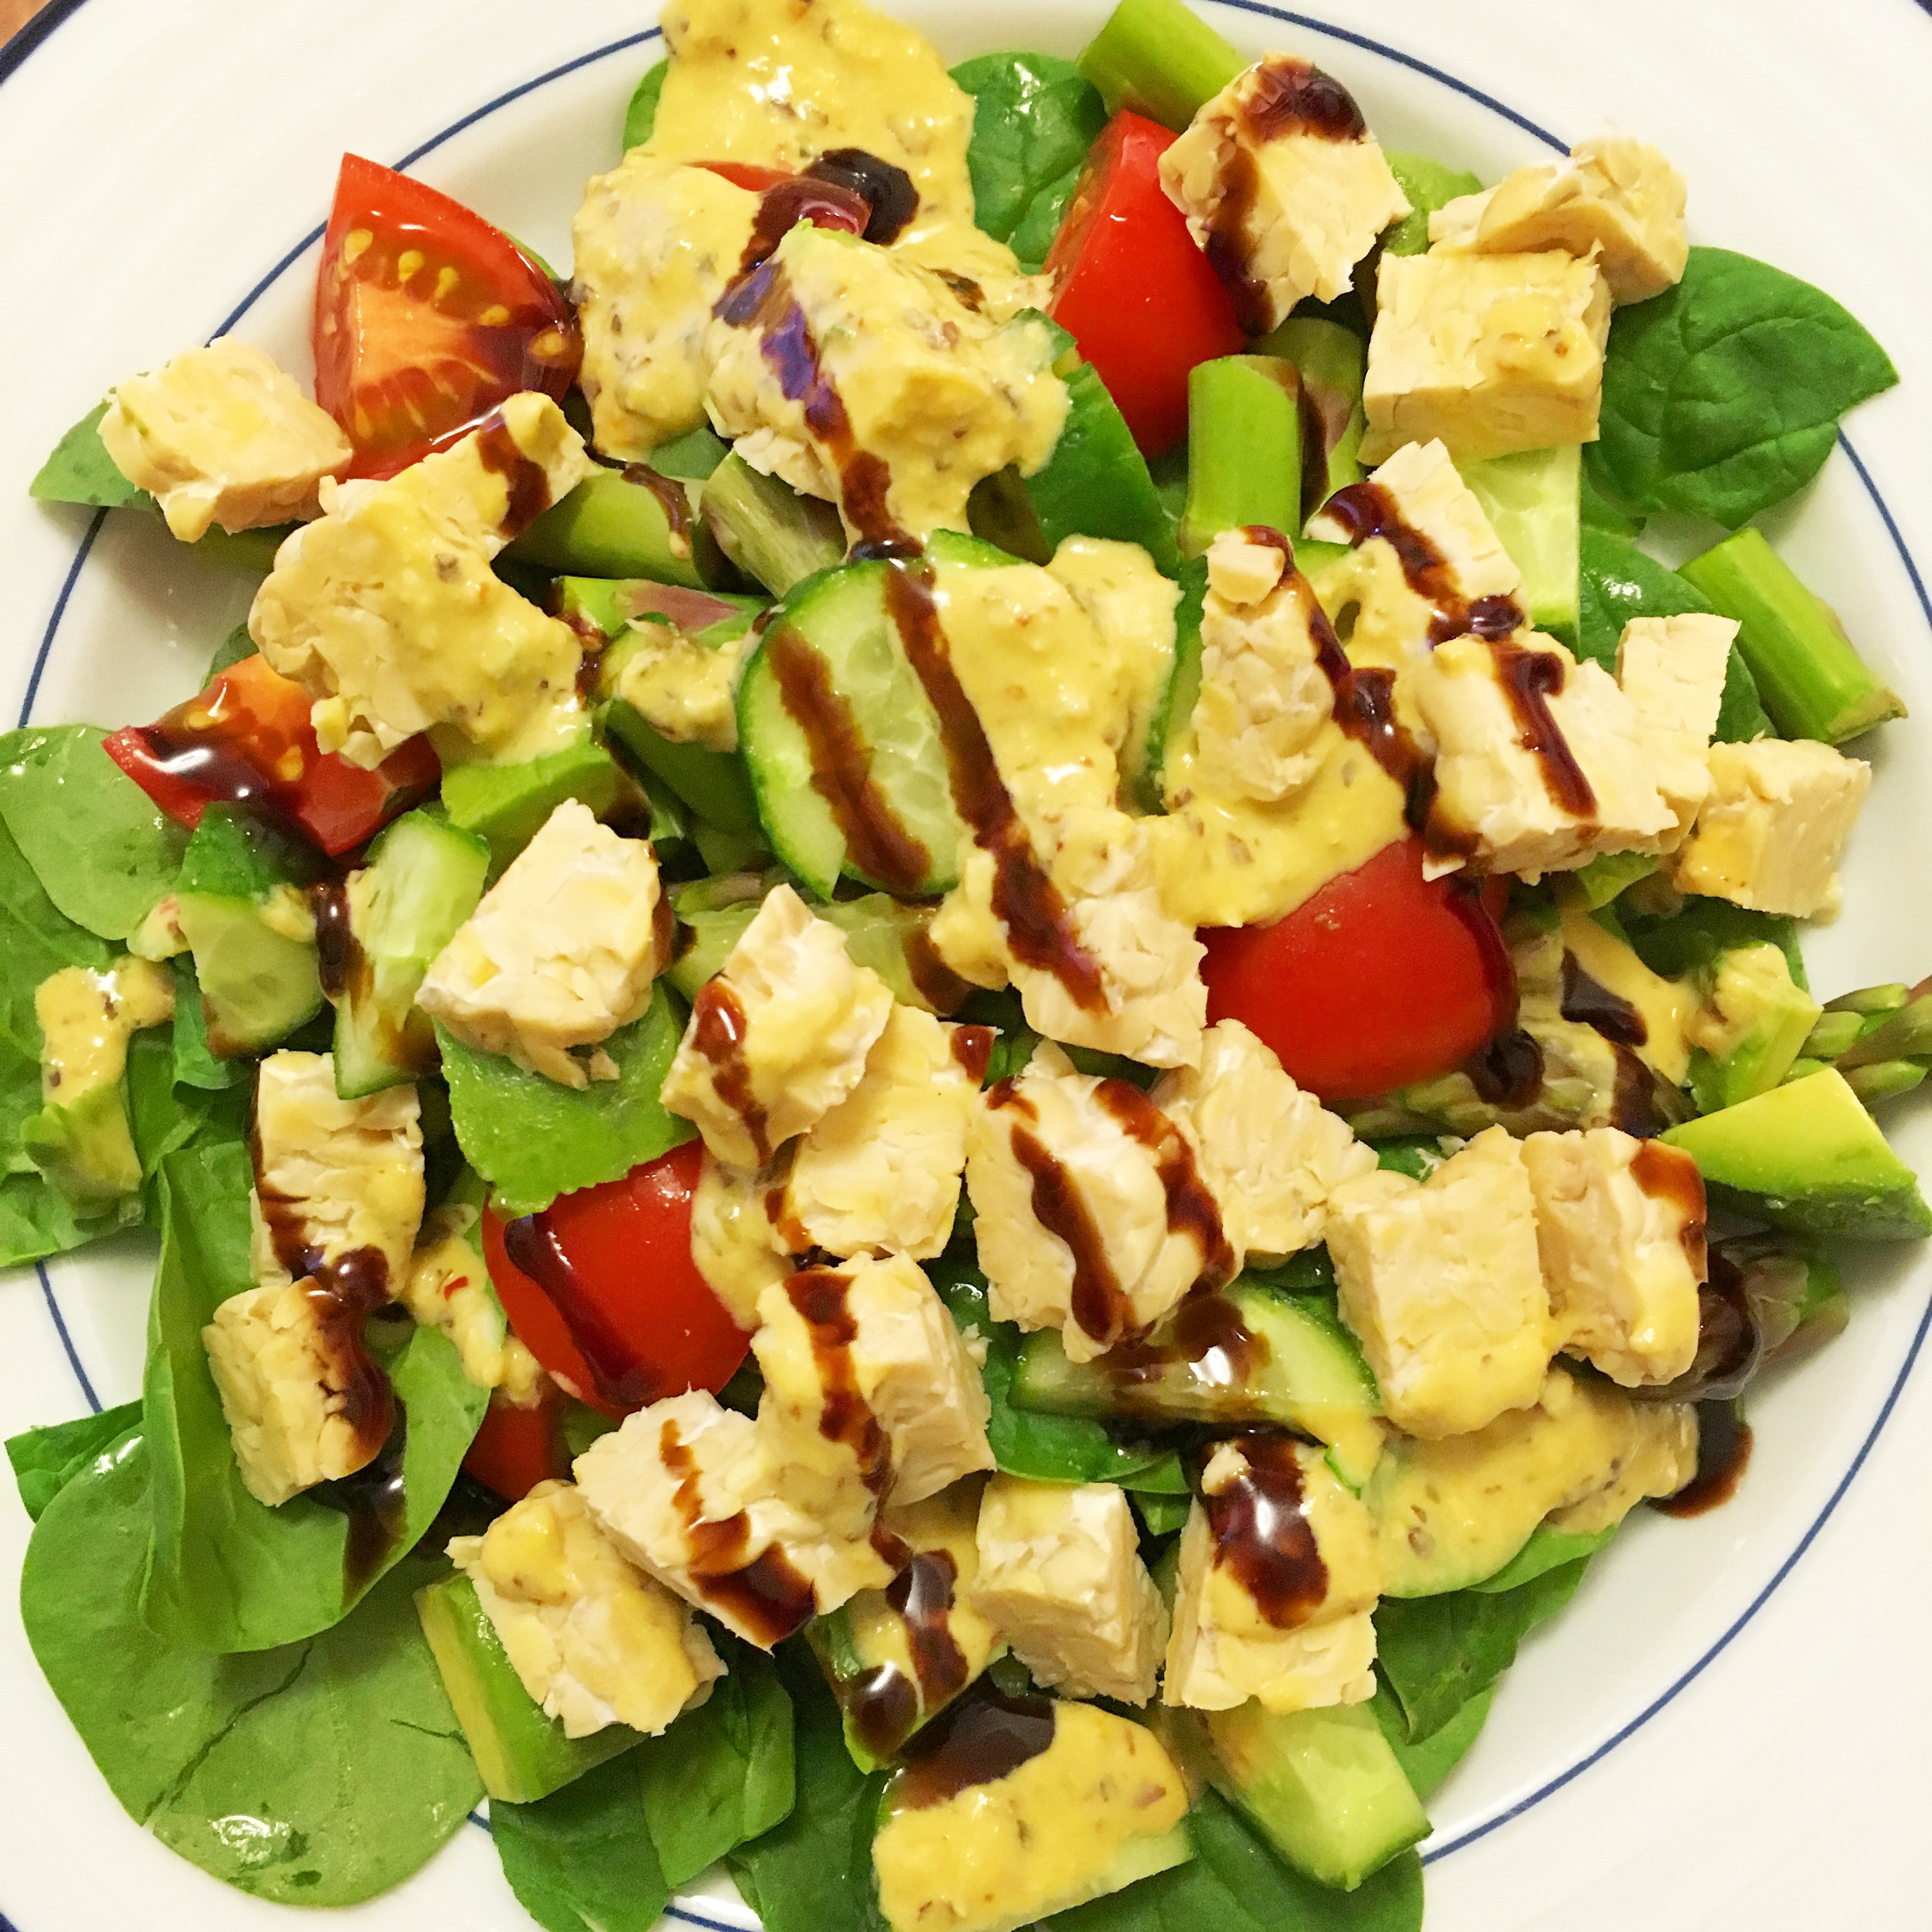 Tempeh dinner salad with a quicke hummus dressing